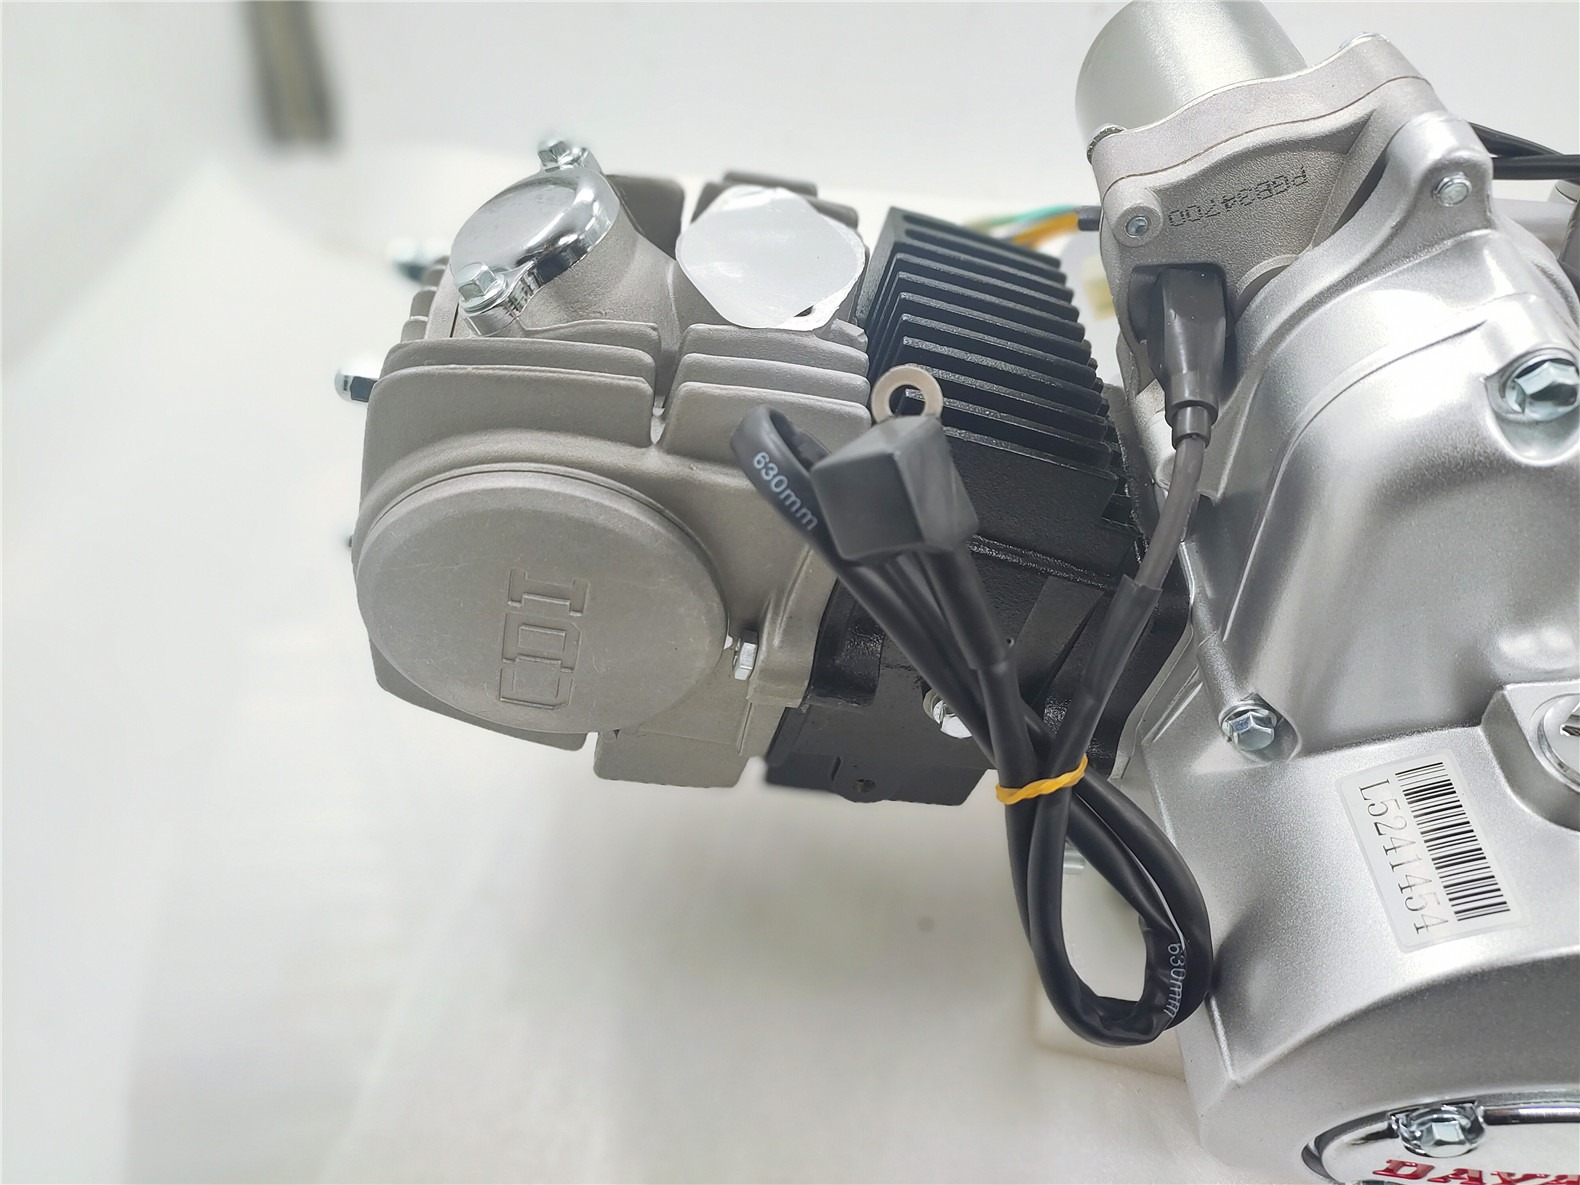 2021 hot selling Lifan DAYANG 125CC air cooling engines assembly for tricycles made in Chongqing factory direct supply